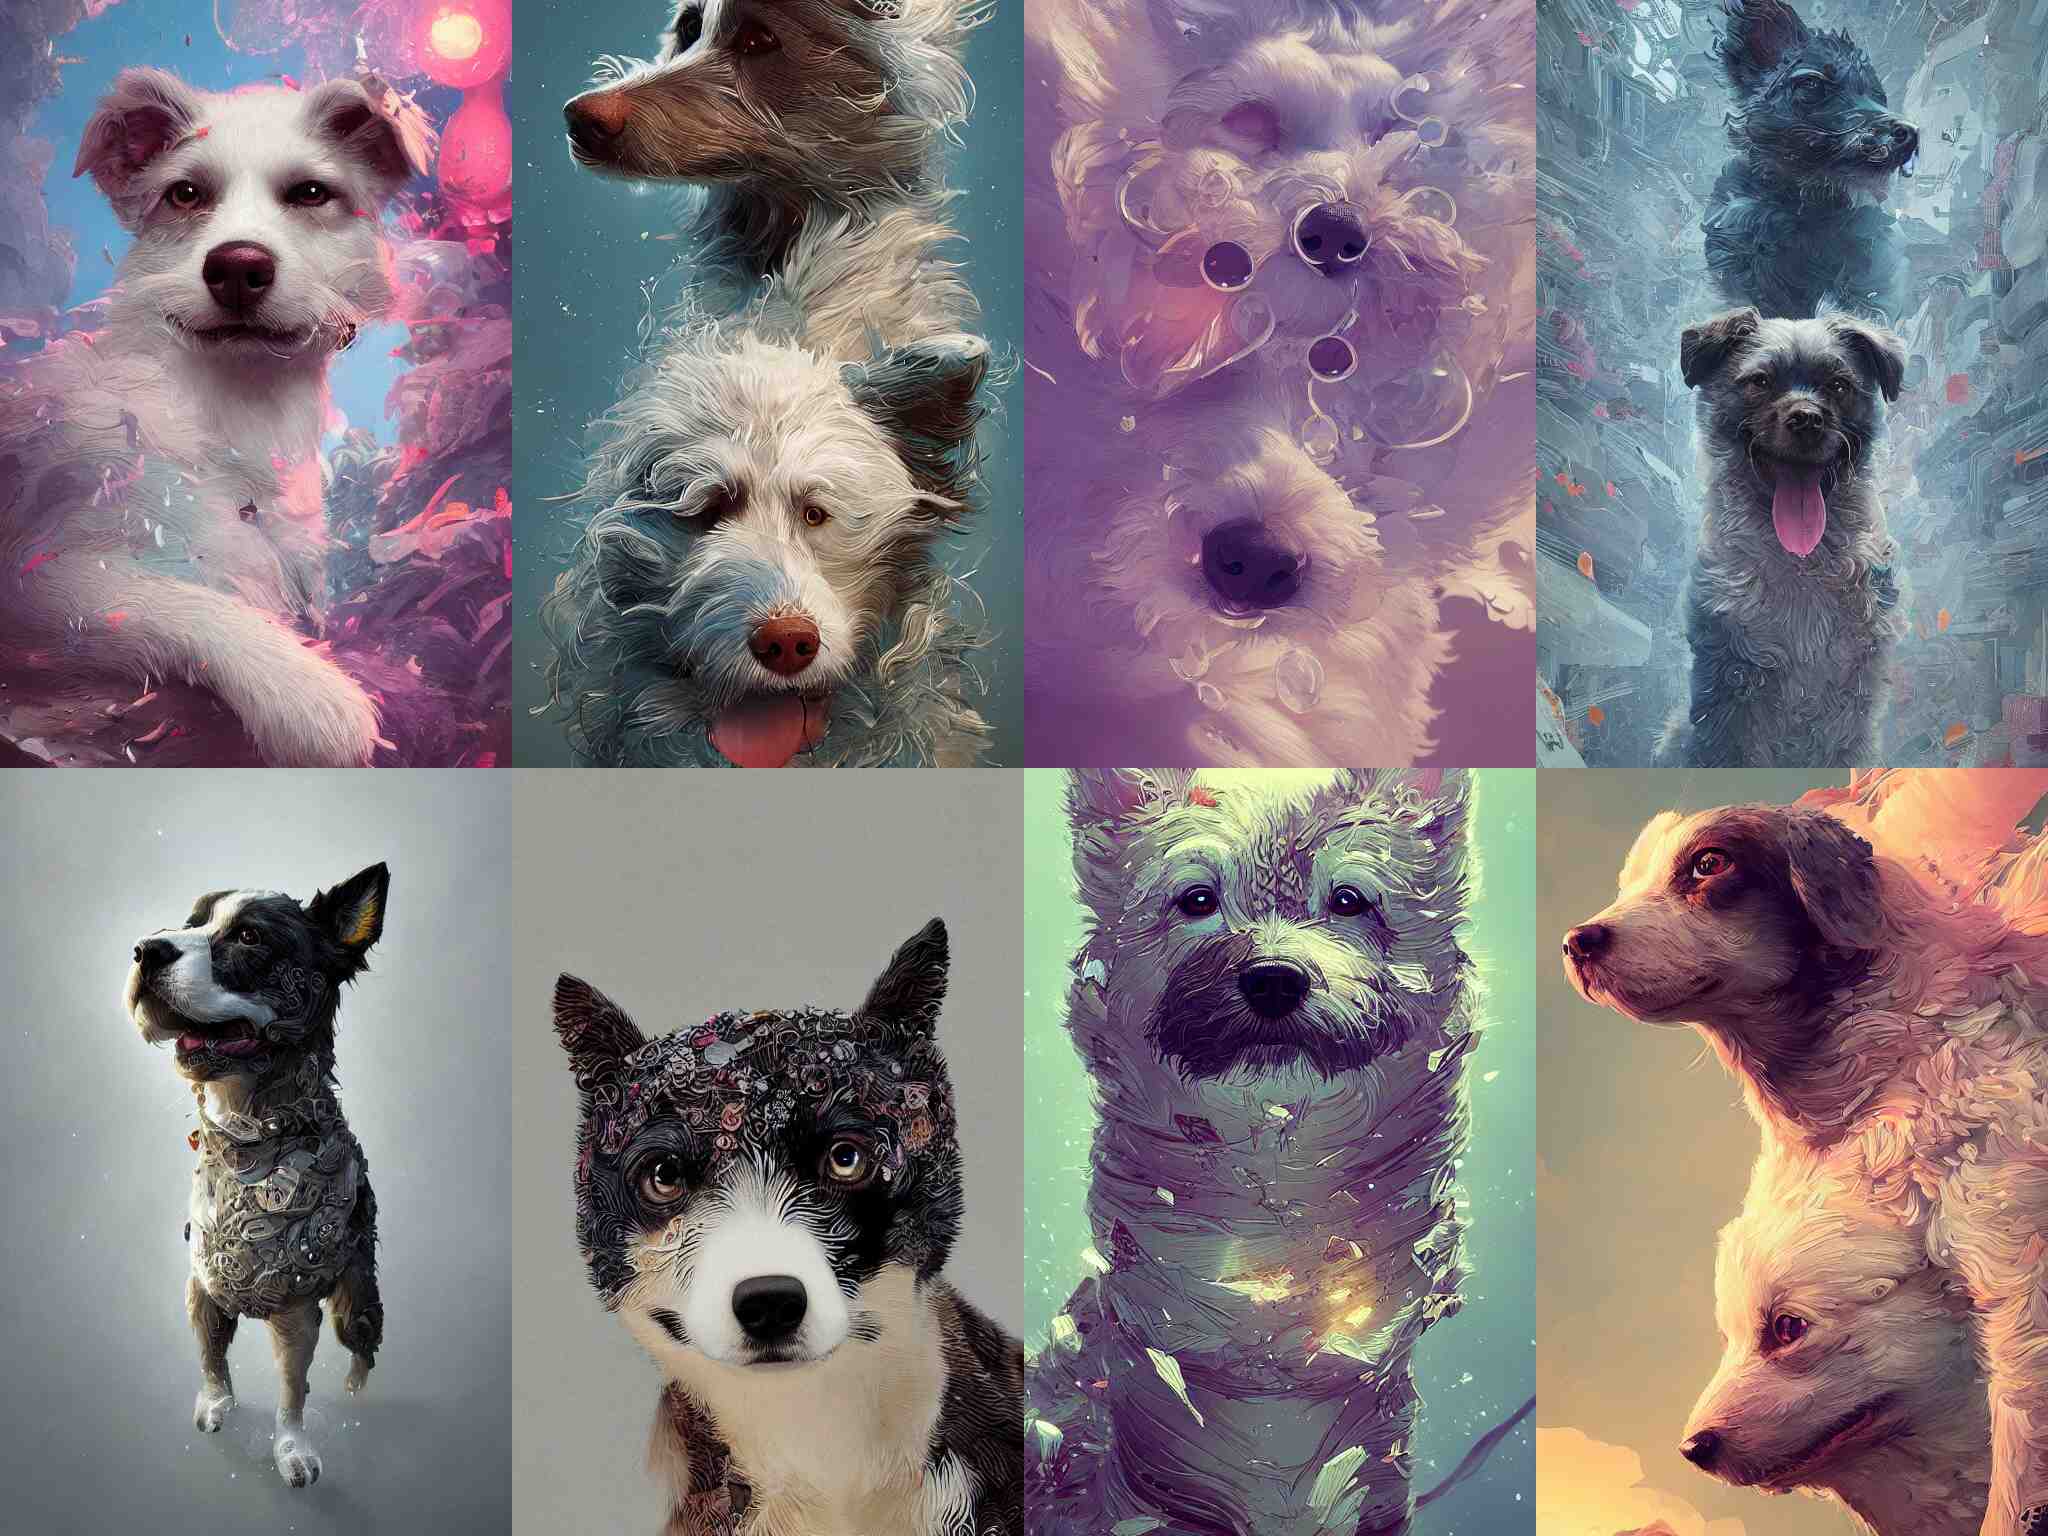 How To Sort Dog Images By Breed Just By Using An API